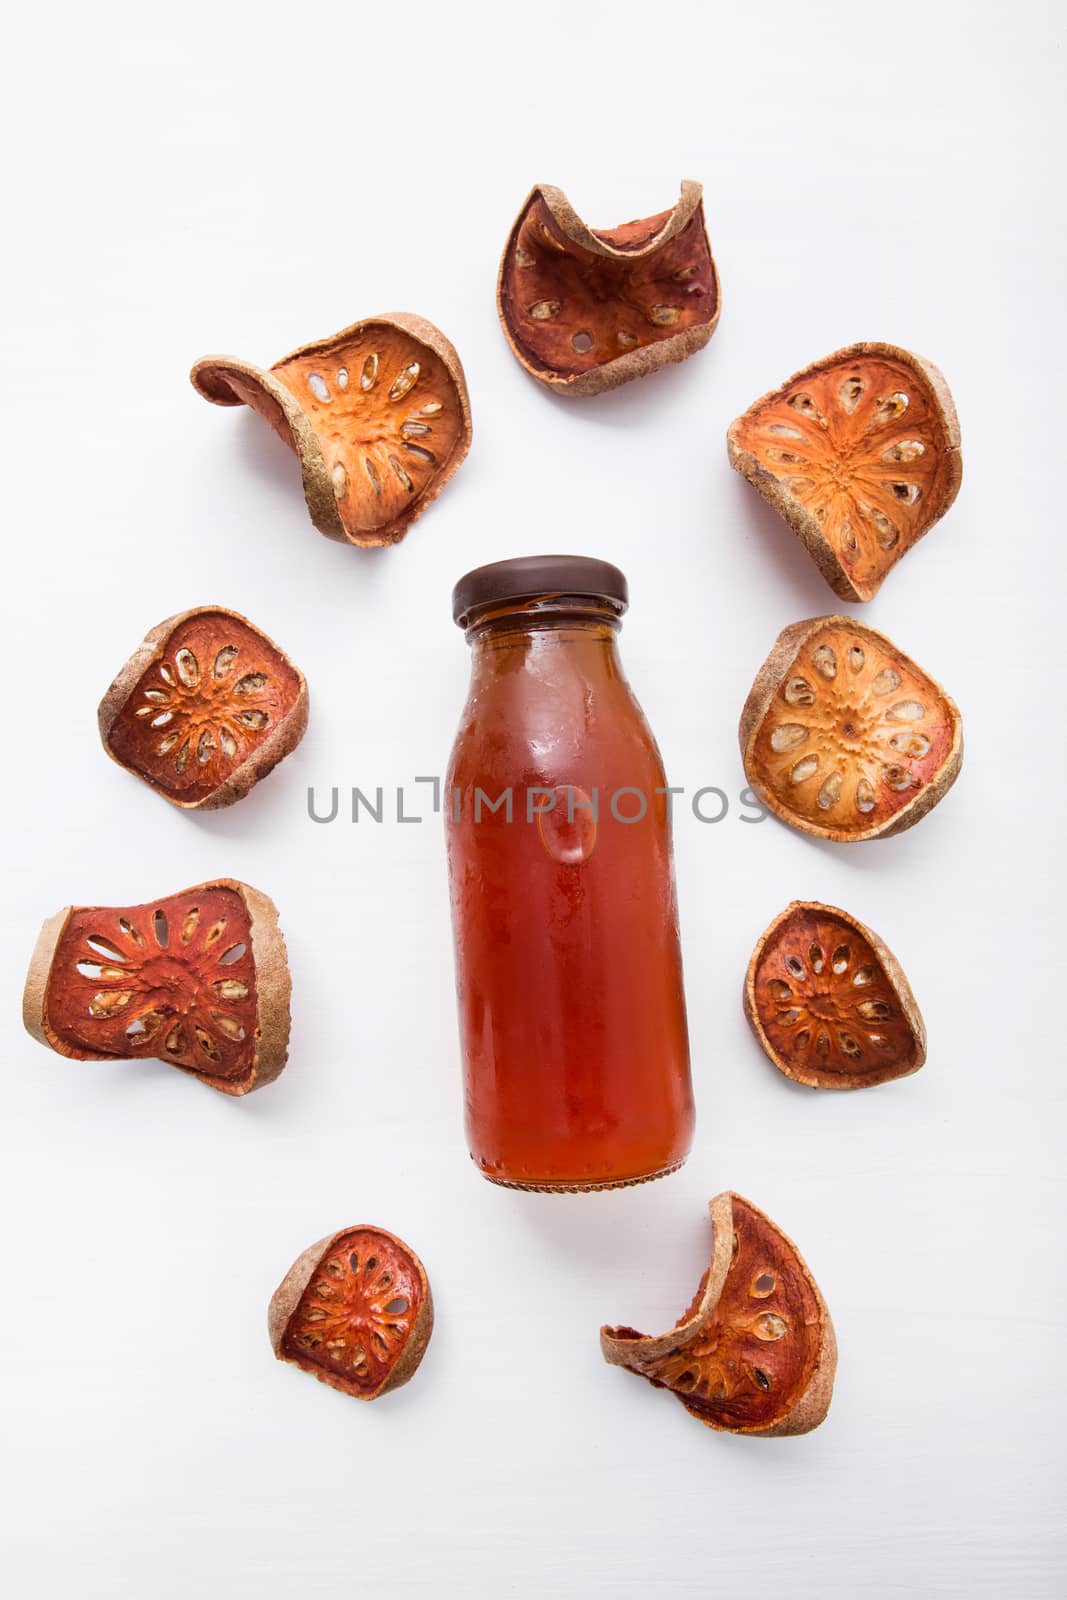 Bael dried and bael juices on white wooden background.